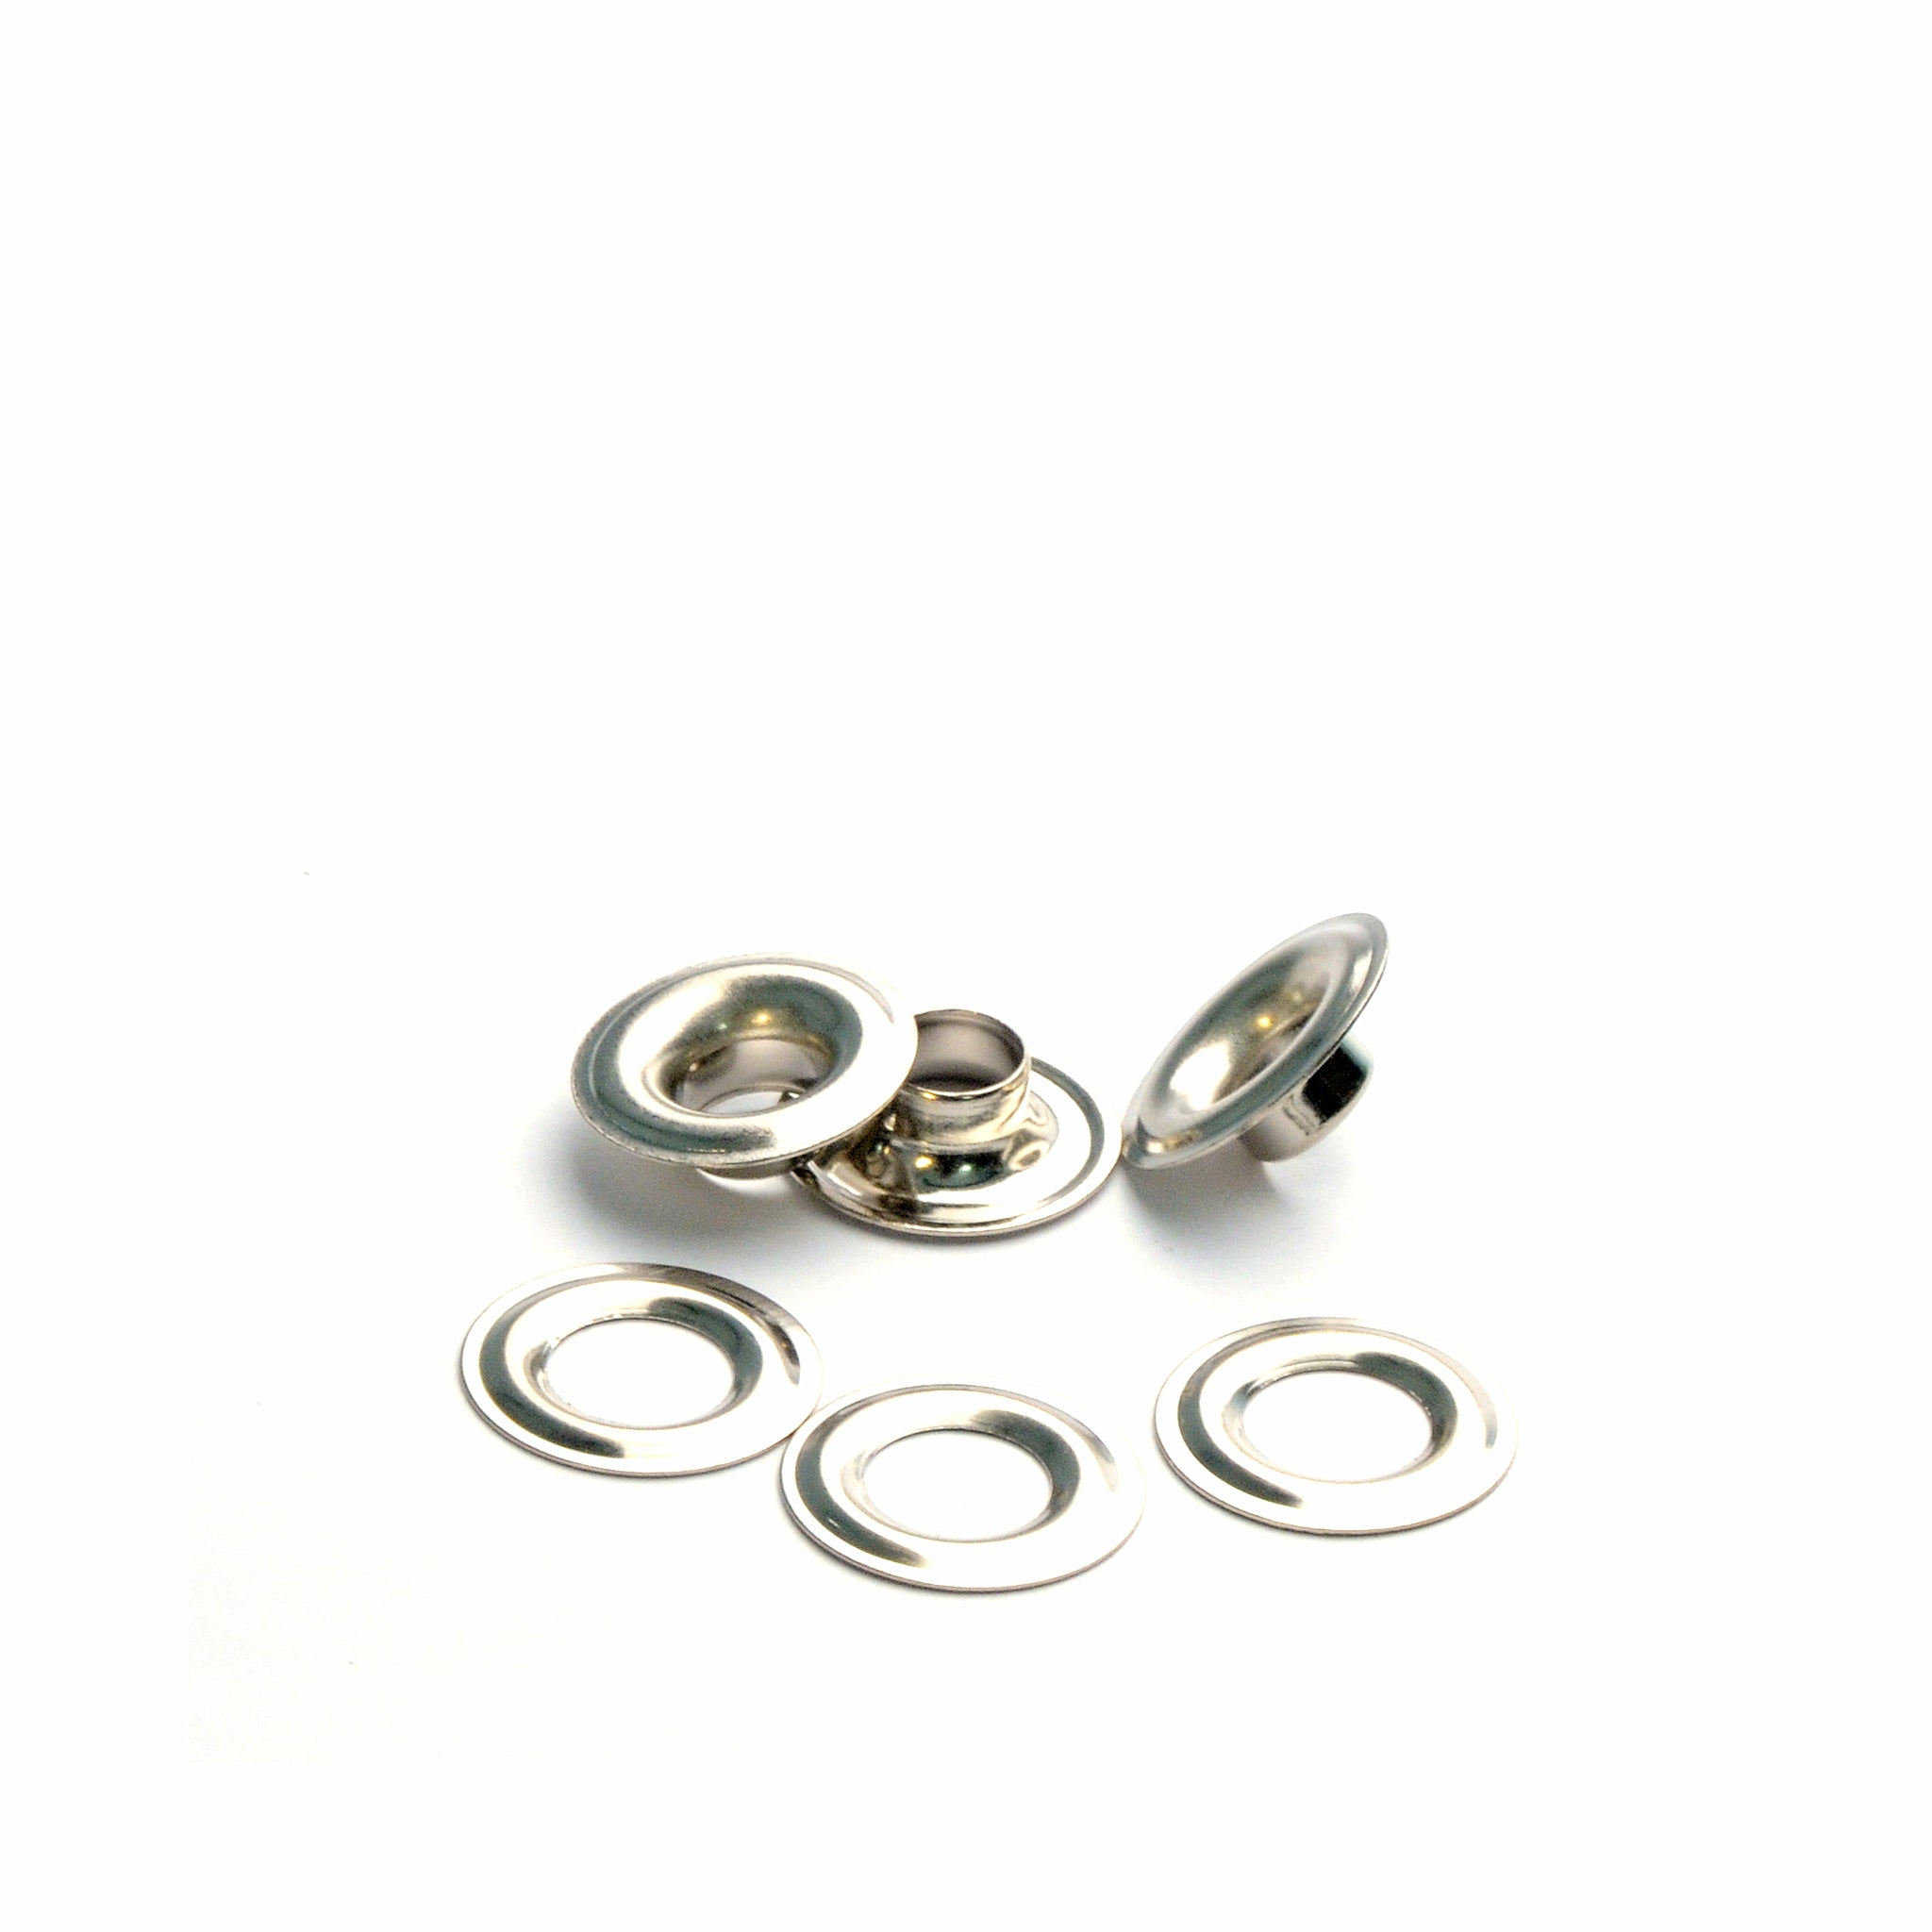 Nickel over Brass Extra Long Solid Brass Grommets (Eyelet and Washer) from Identity Leathercraft